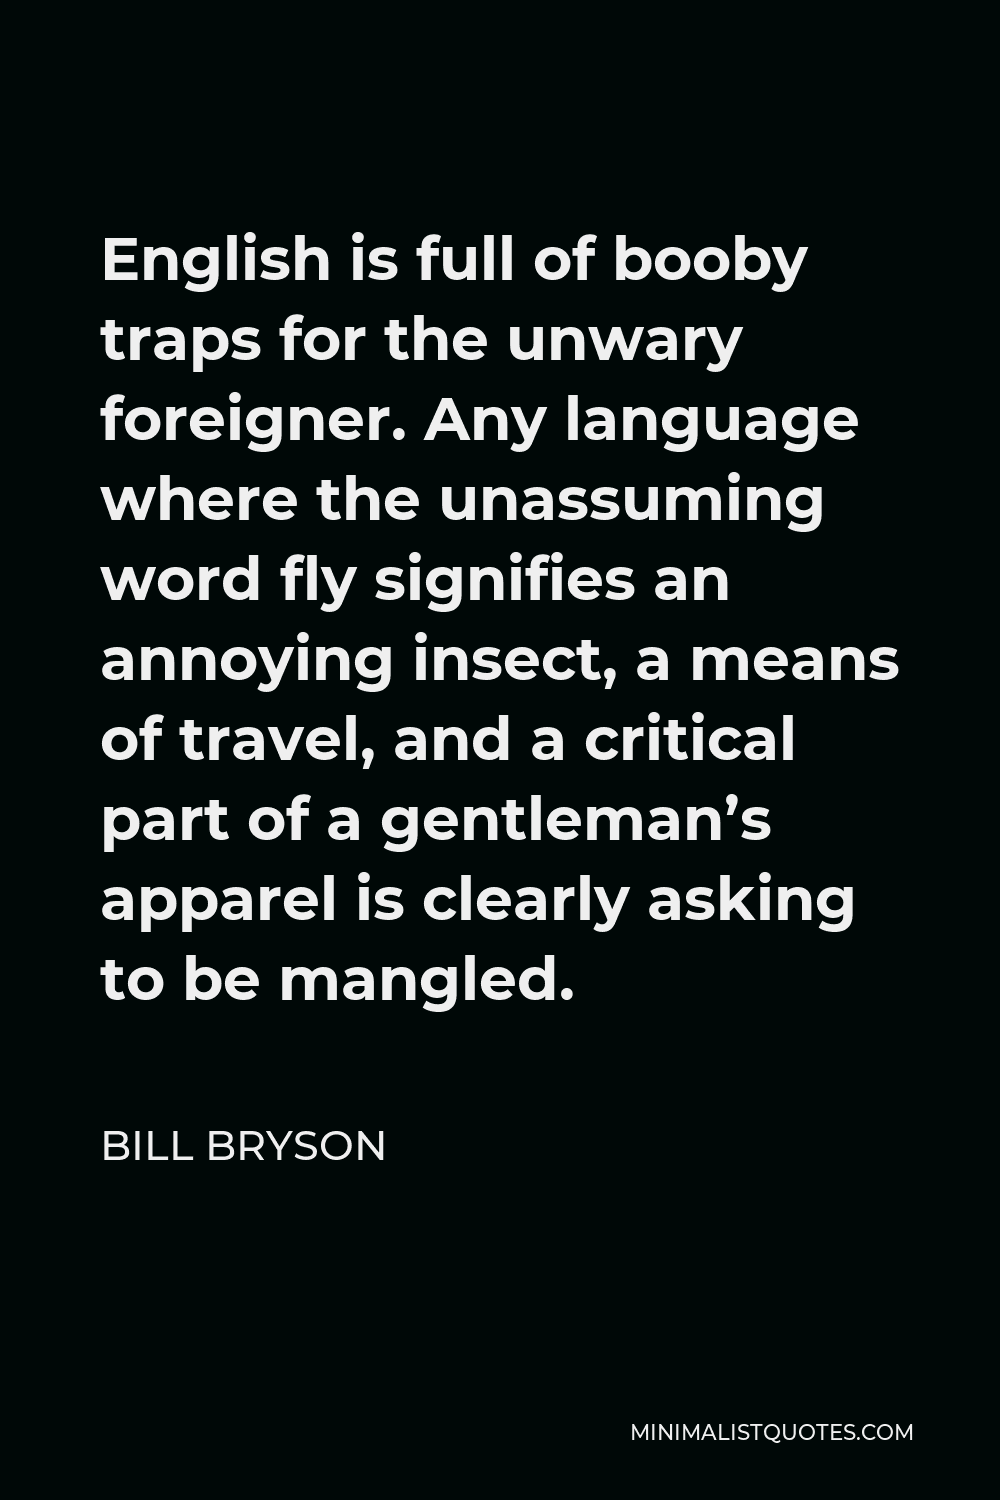 Bill Bryson Quote - English is full of booby traps for the unwary foreigner. Any language where the unassuming word fly signifies an annoying insect, a means of travel, and a critical part of a gentleman’s apparel is clearly asking to be mangled.